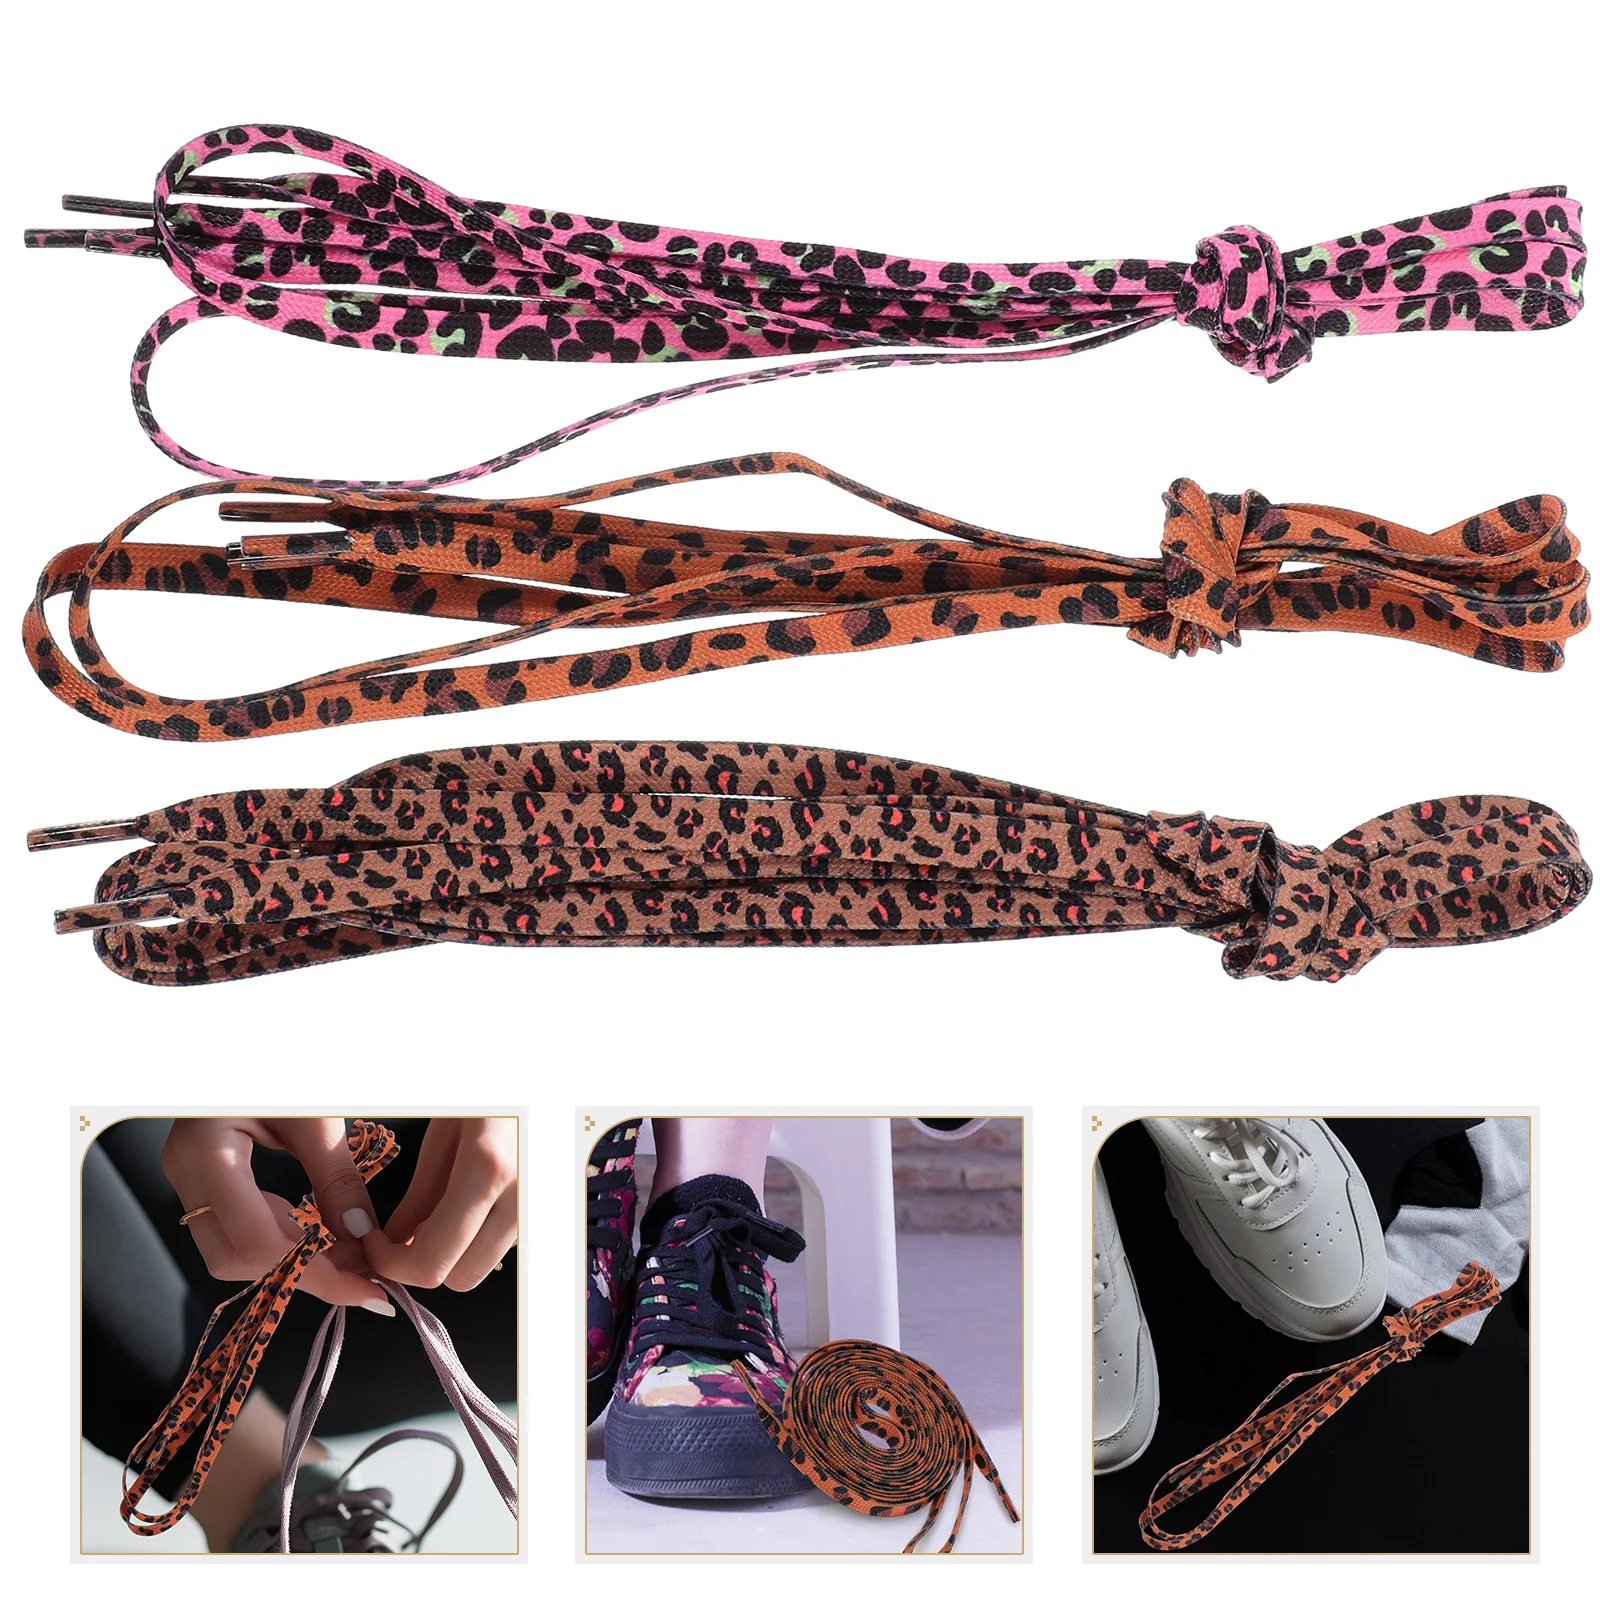 3 Pairs Shoelace Laces for Sneakers Leopard Print Shoelaces Polyester Flat Decorative